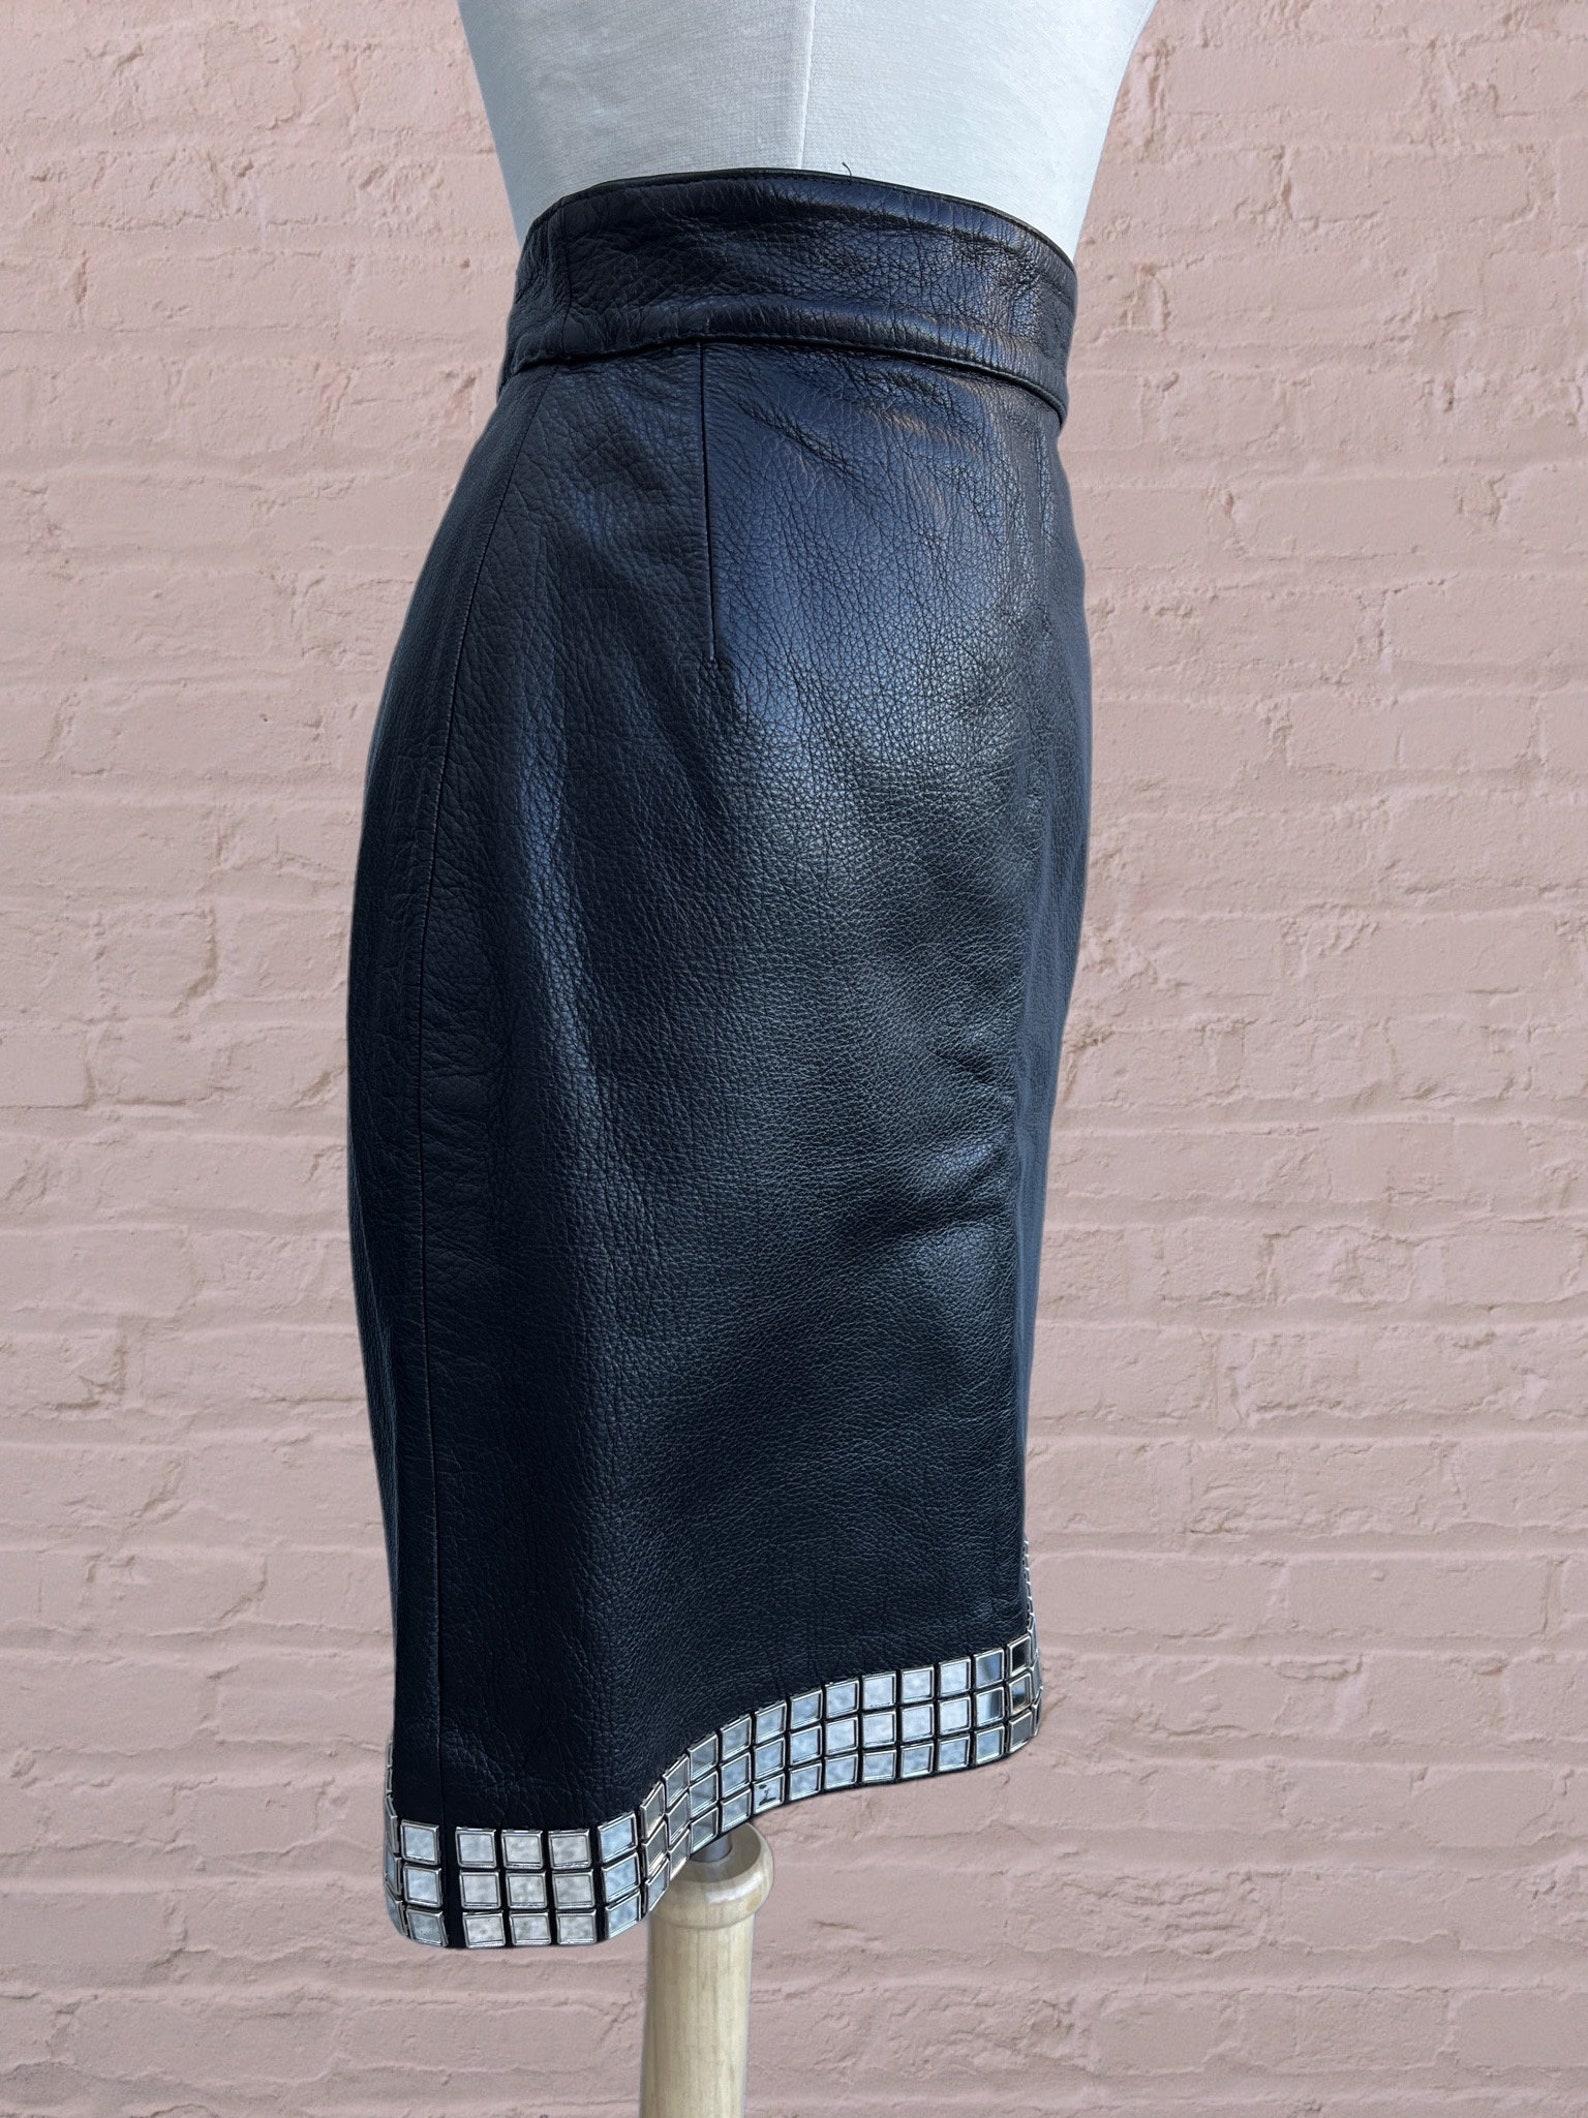 Moschino black leather mirror skirt In Good Condition For Sale In Brooklyn, NY